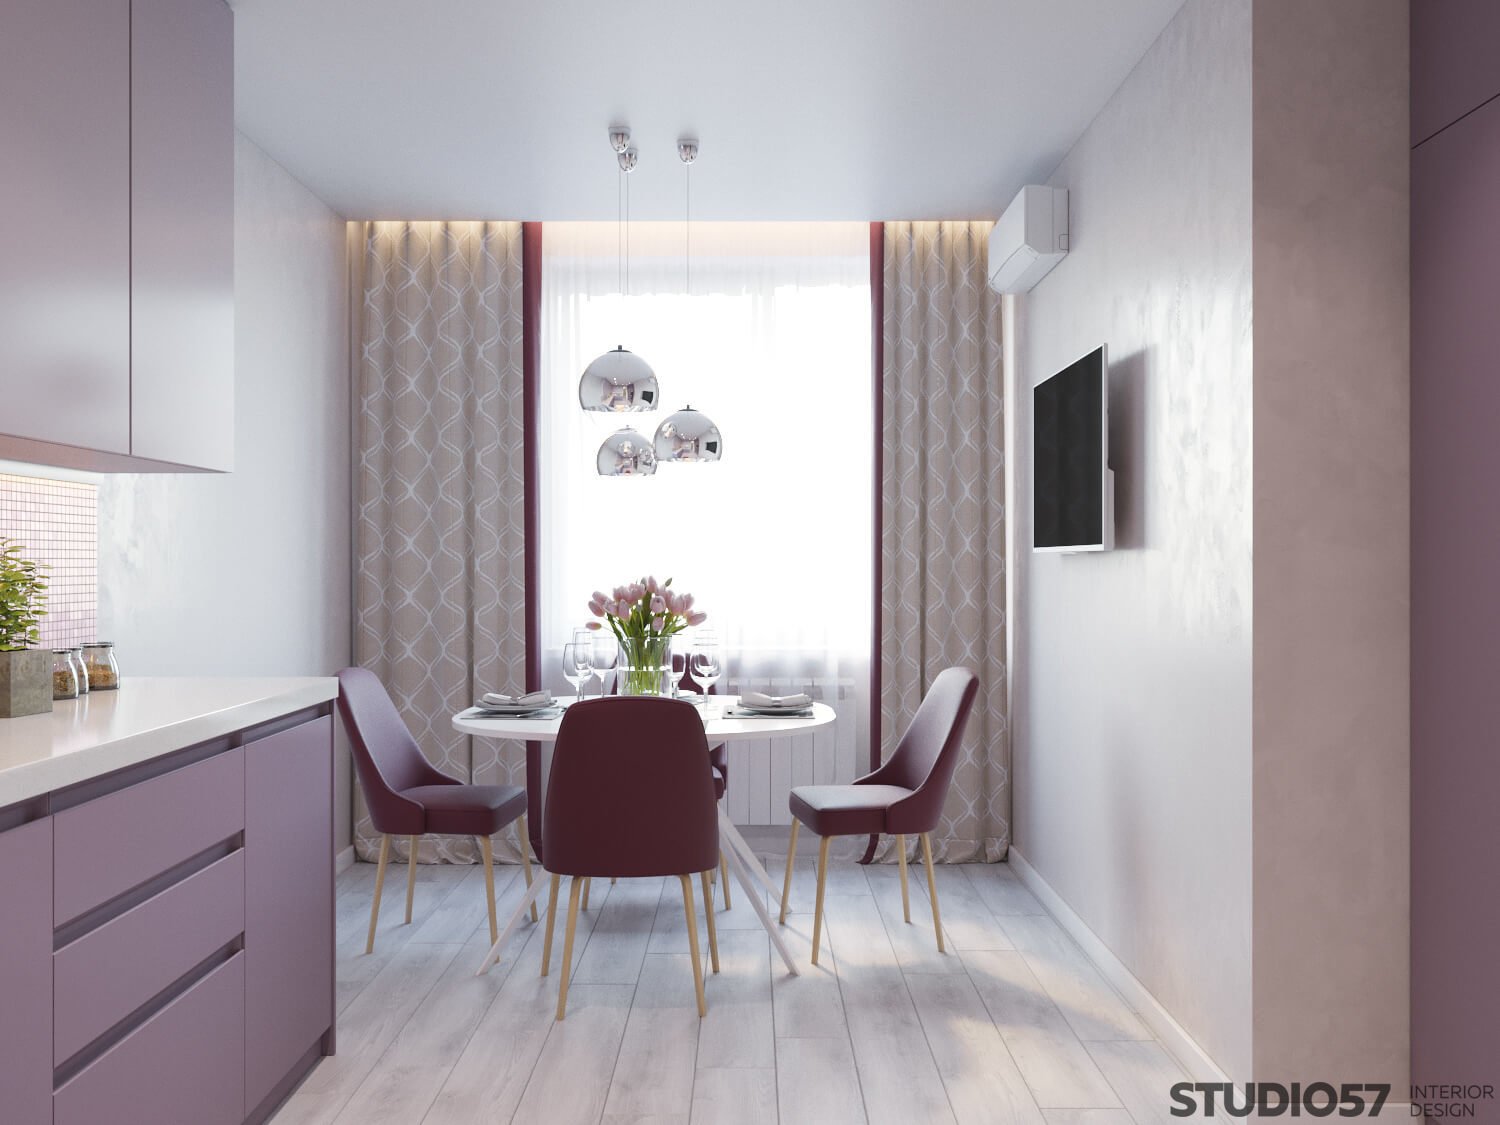 Dining area in pink